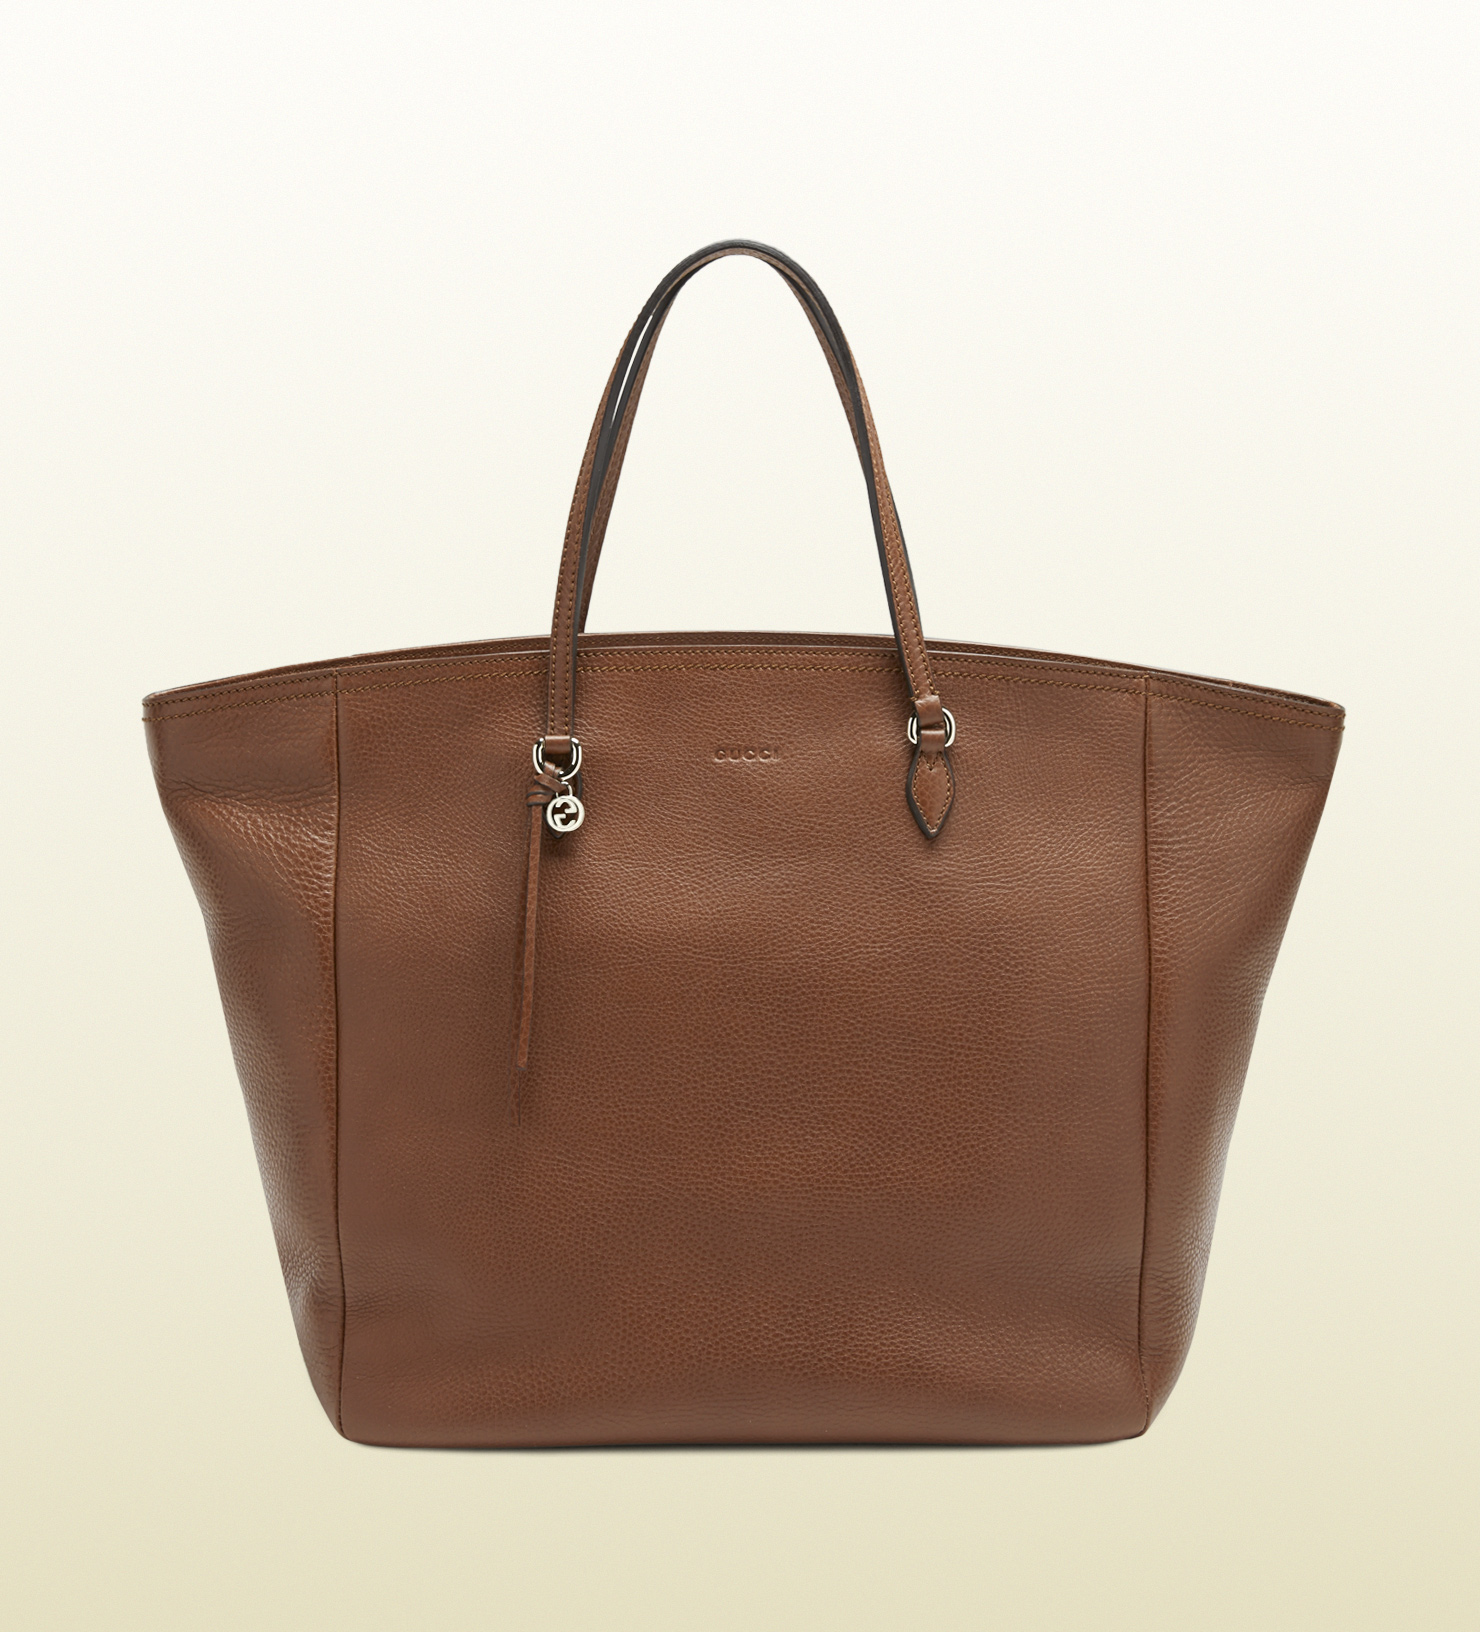 Lyst - Gucci Bree Leather Tote in Brown